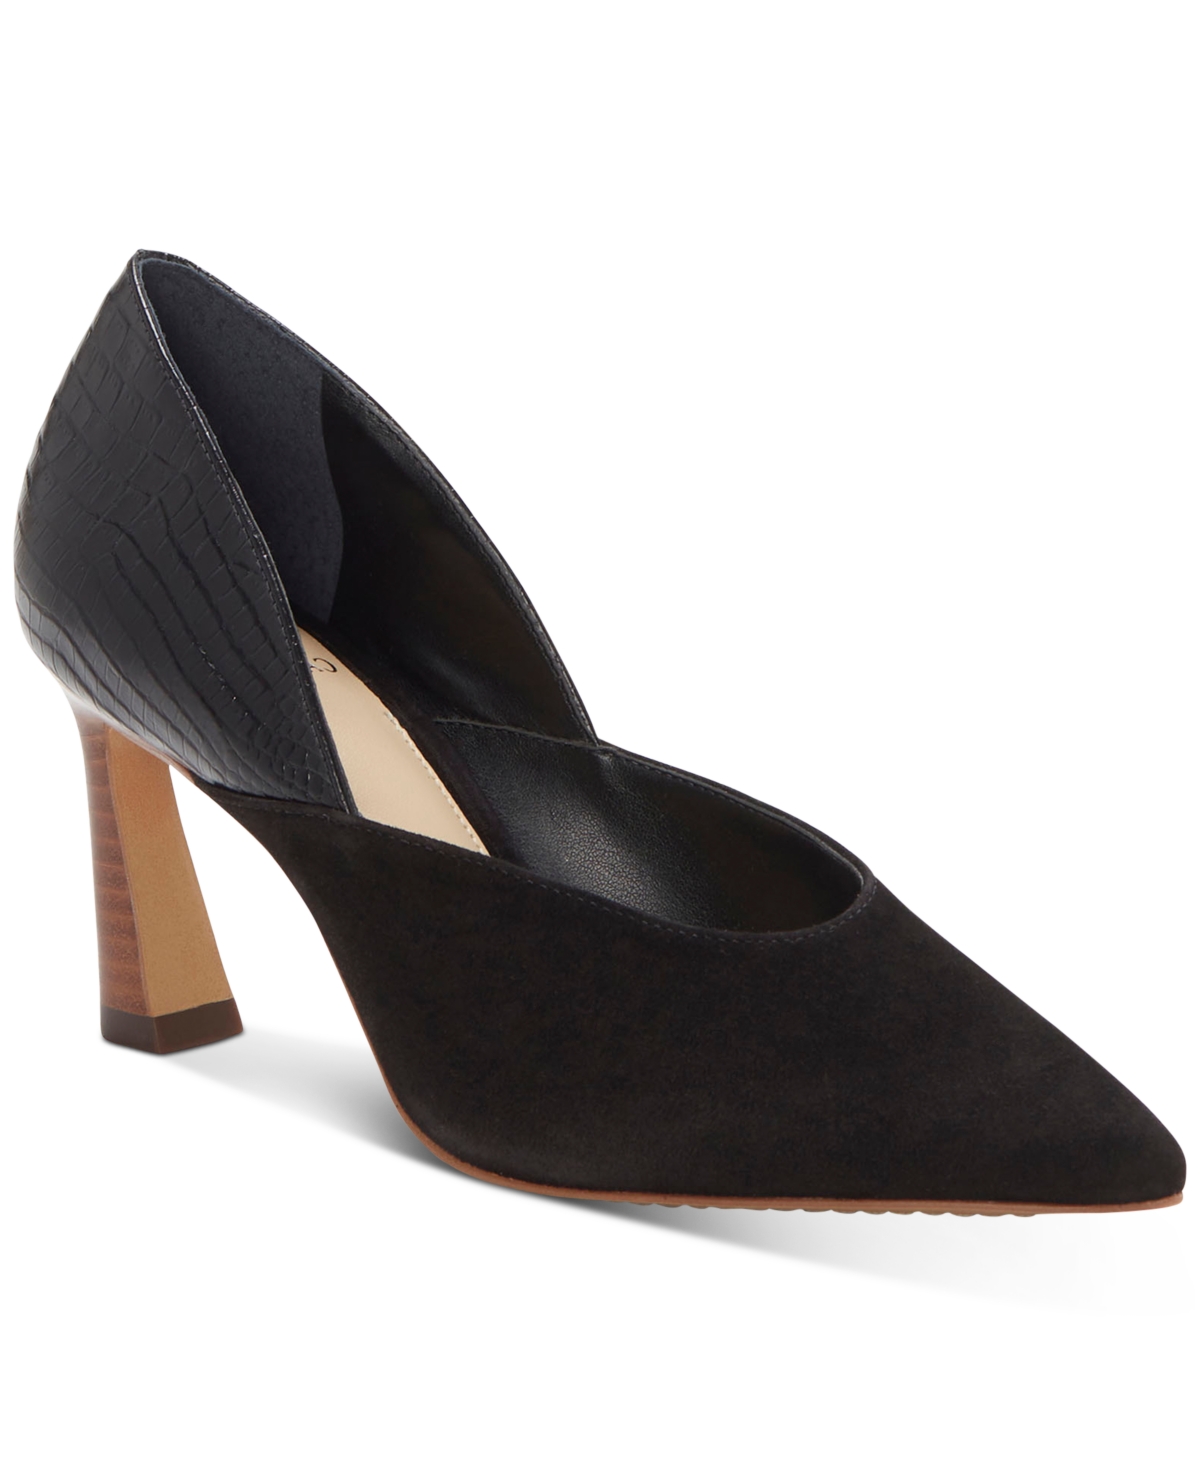 UPC 191707306257 product image for Vince Camuto Women's Kastani Pointed-Toe Pumps Women's Shoes | upcitemdb.com